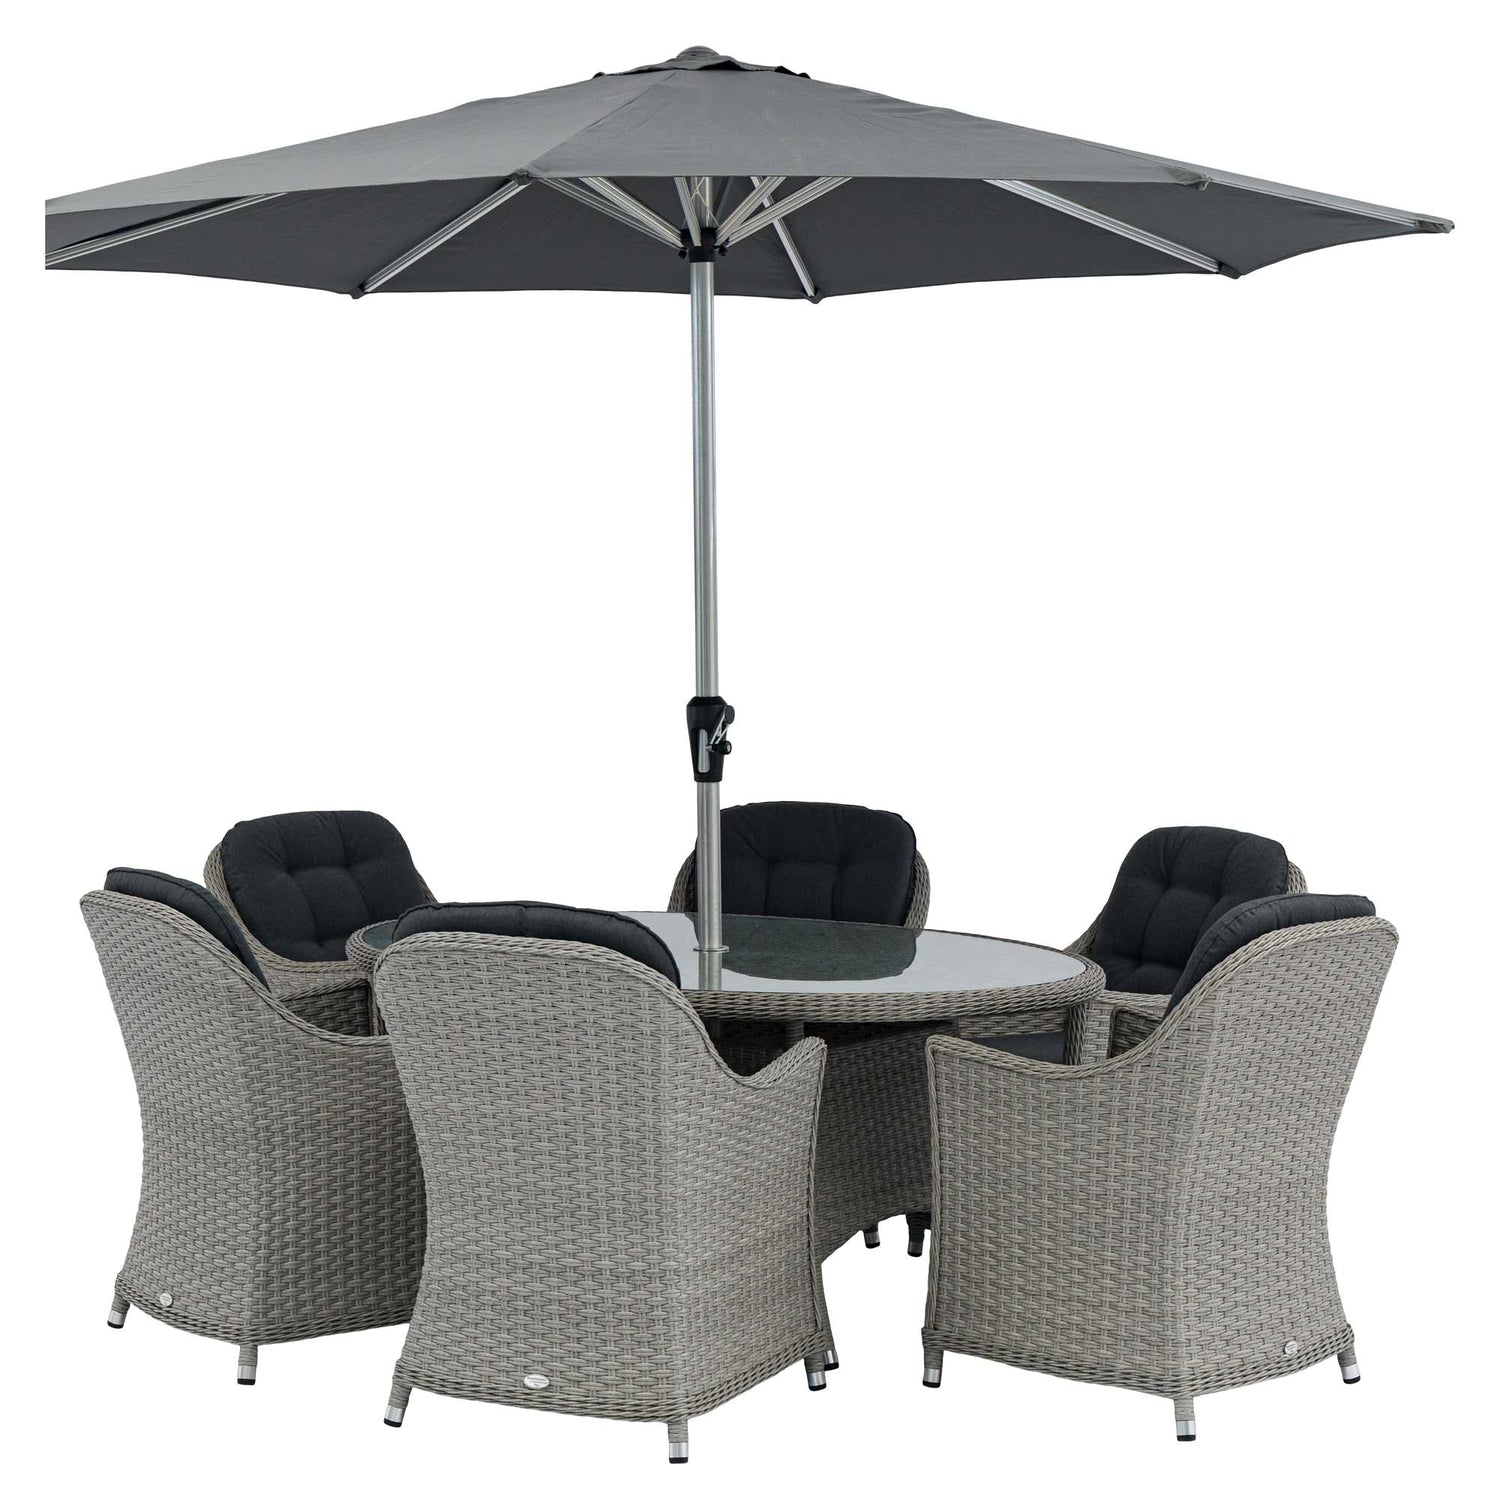 X24WWT175EL1-Wentworth-175cm-Elliptical-Table-with-6-Armchairs,-Parasol-&-Base-6-seater-new.jpg